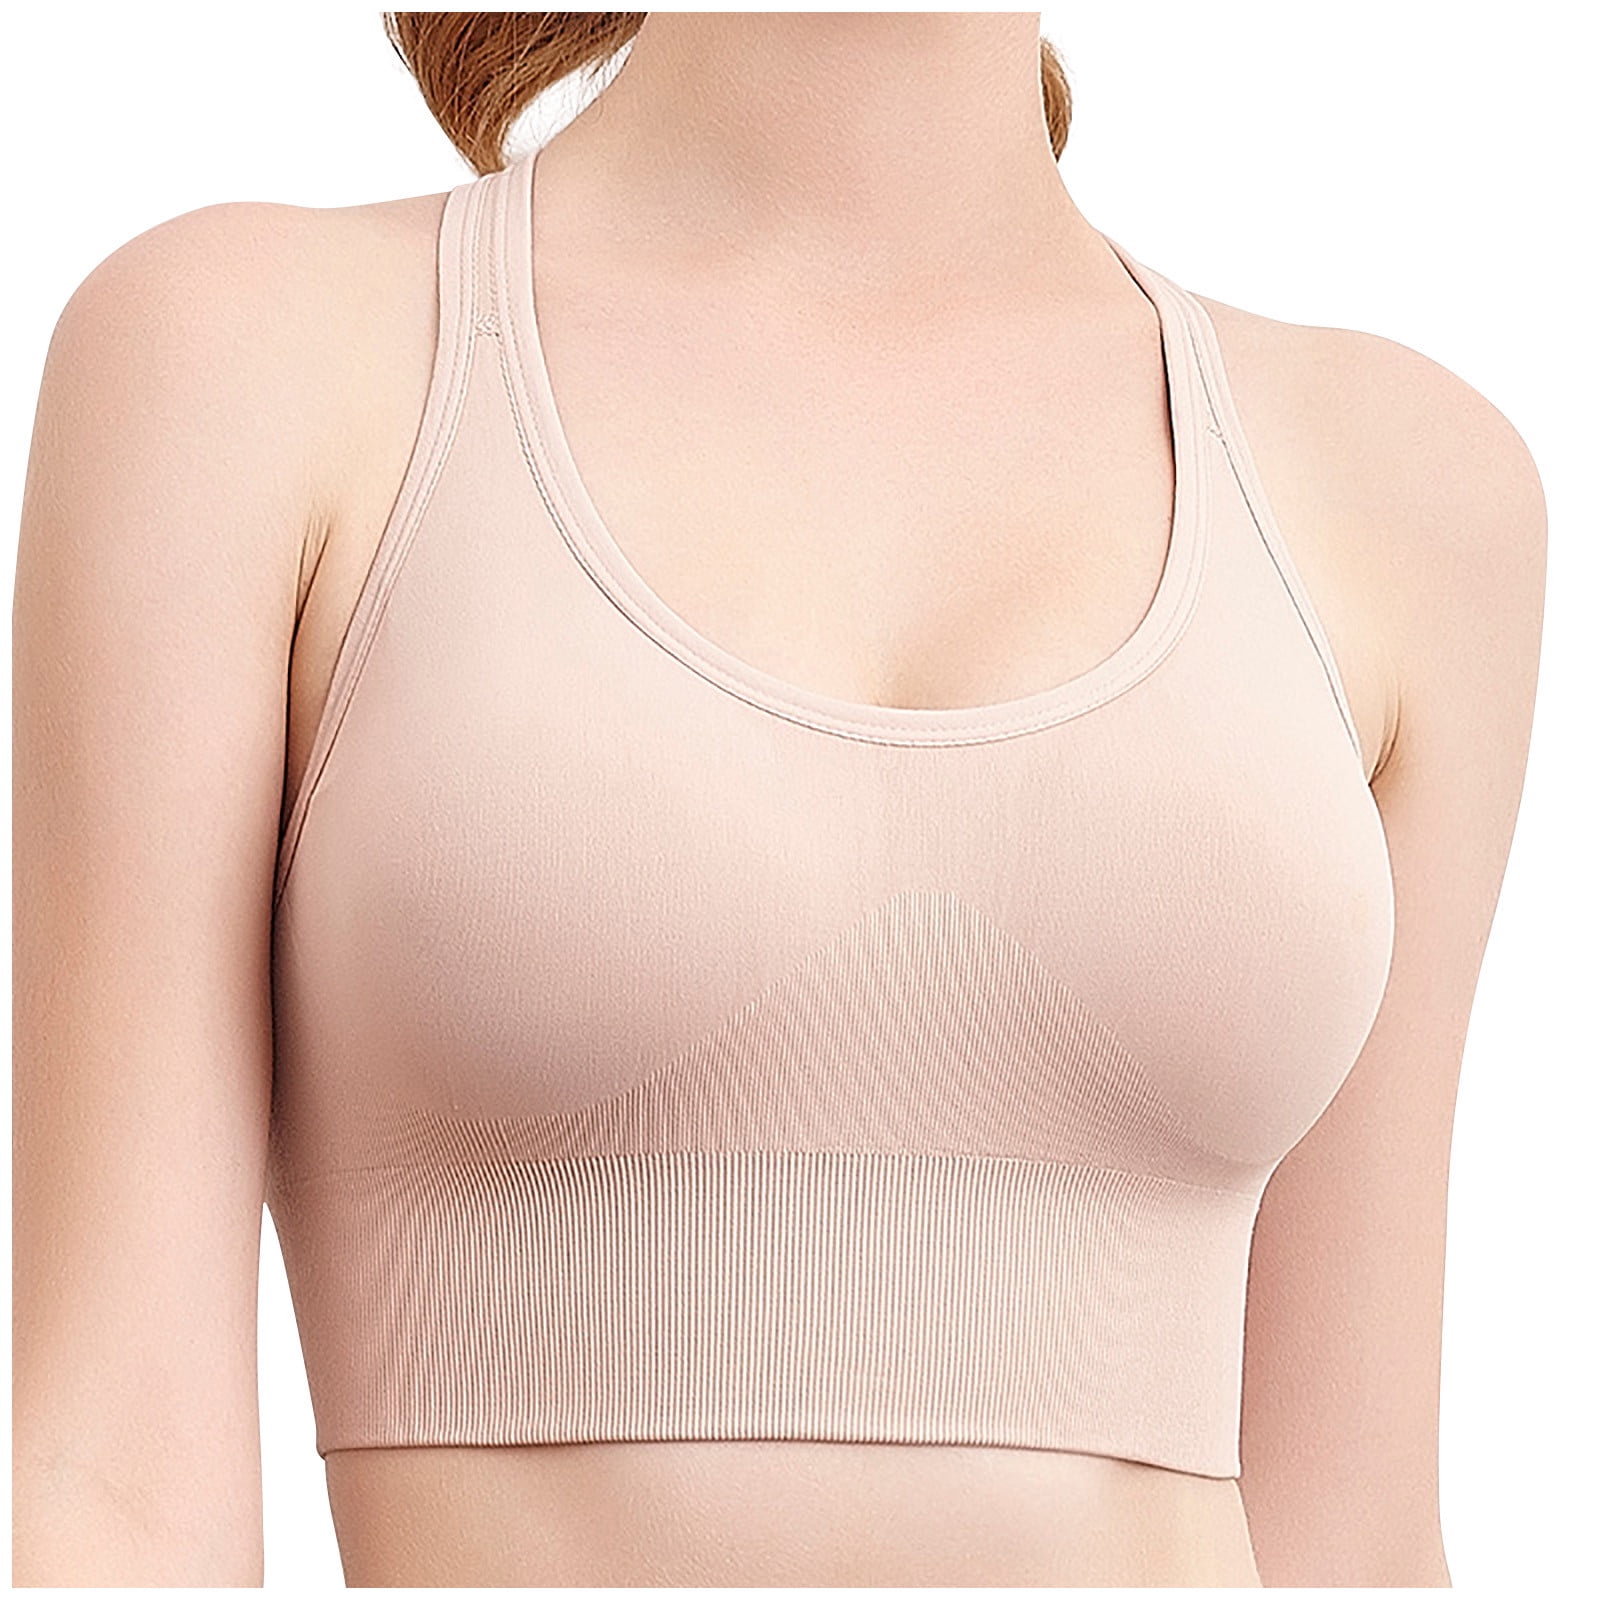 RYRJJ Women's Y Back Sports Bra Strappy Seamless Padded Workout Tops Solid  Soft Comfy Low Impact Support Workout Yoga Bras(Beige,L)